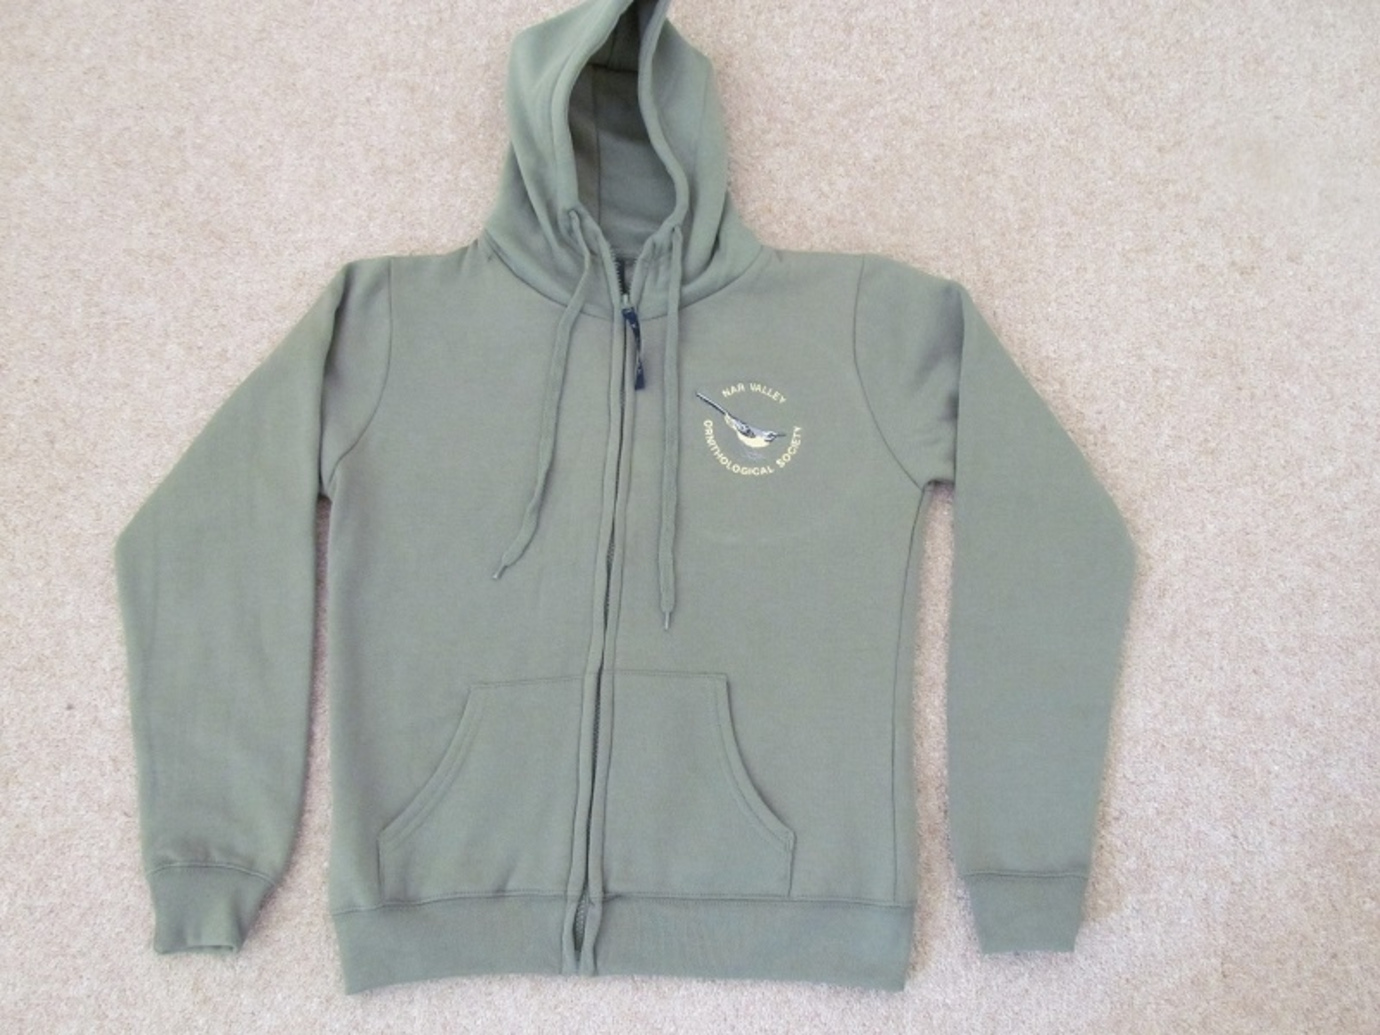 Hooded Sweatshirt (also available in Olive) £23.00